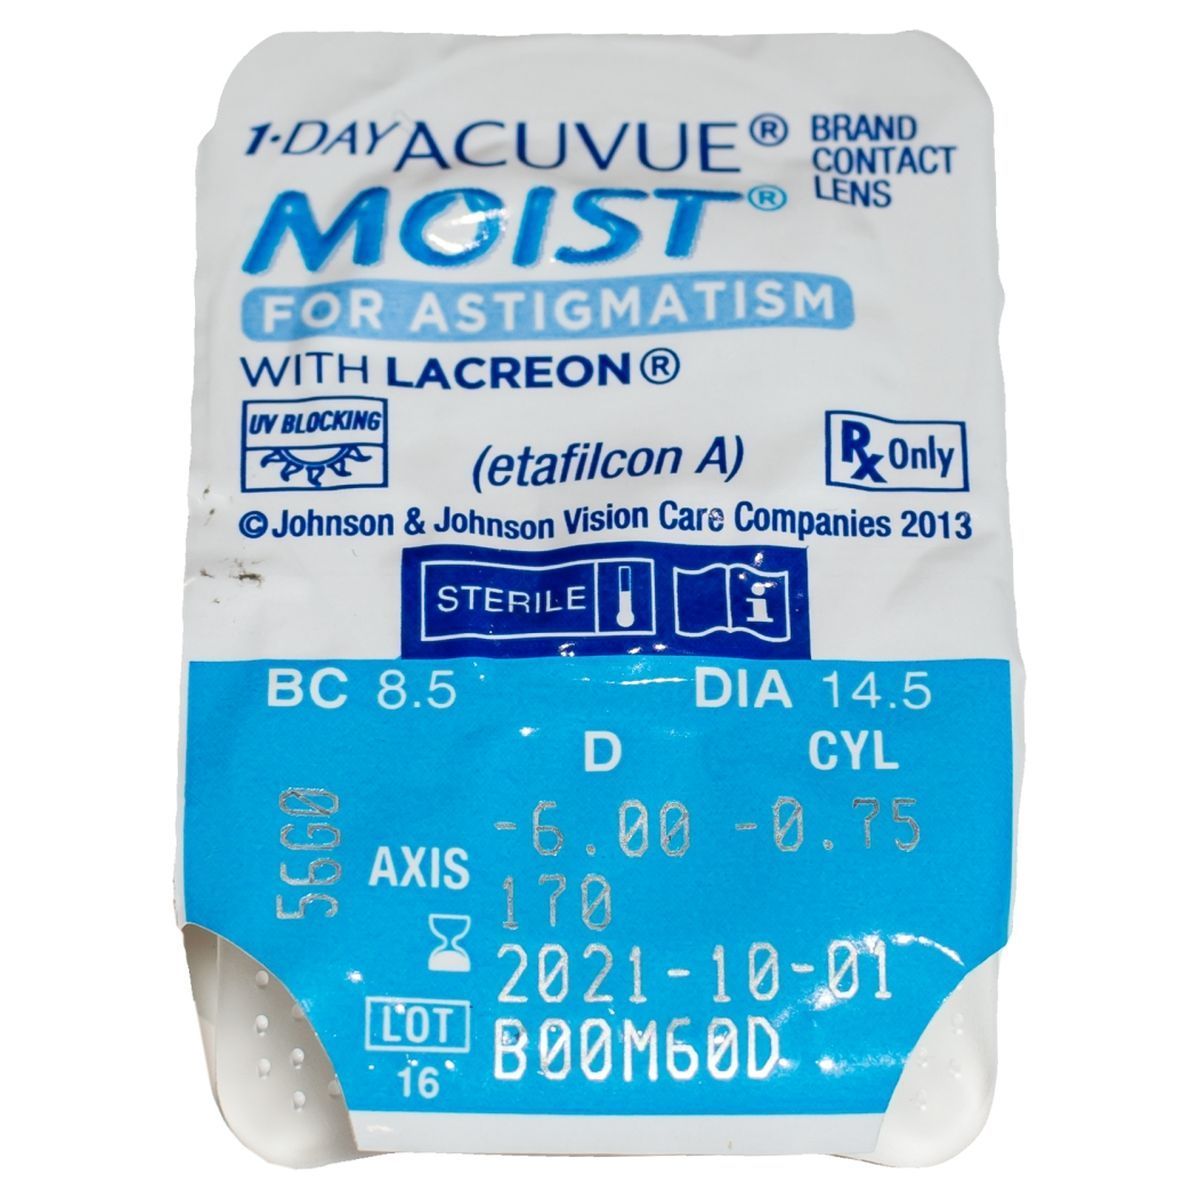 1-DAY ACUVUE MOIST FOR ASTIGMATISM DAILY DISPOSABLE CONTACT LENSES FOR ASTIGMATISM (90 LENSES)